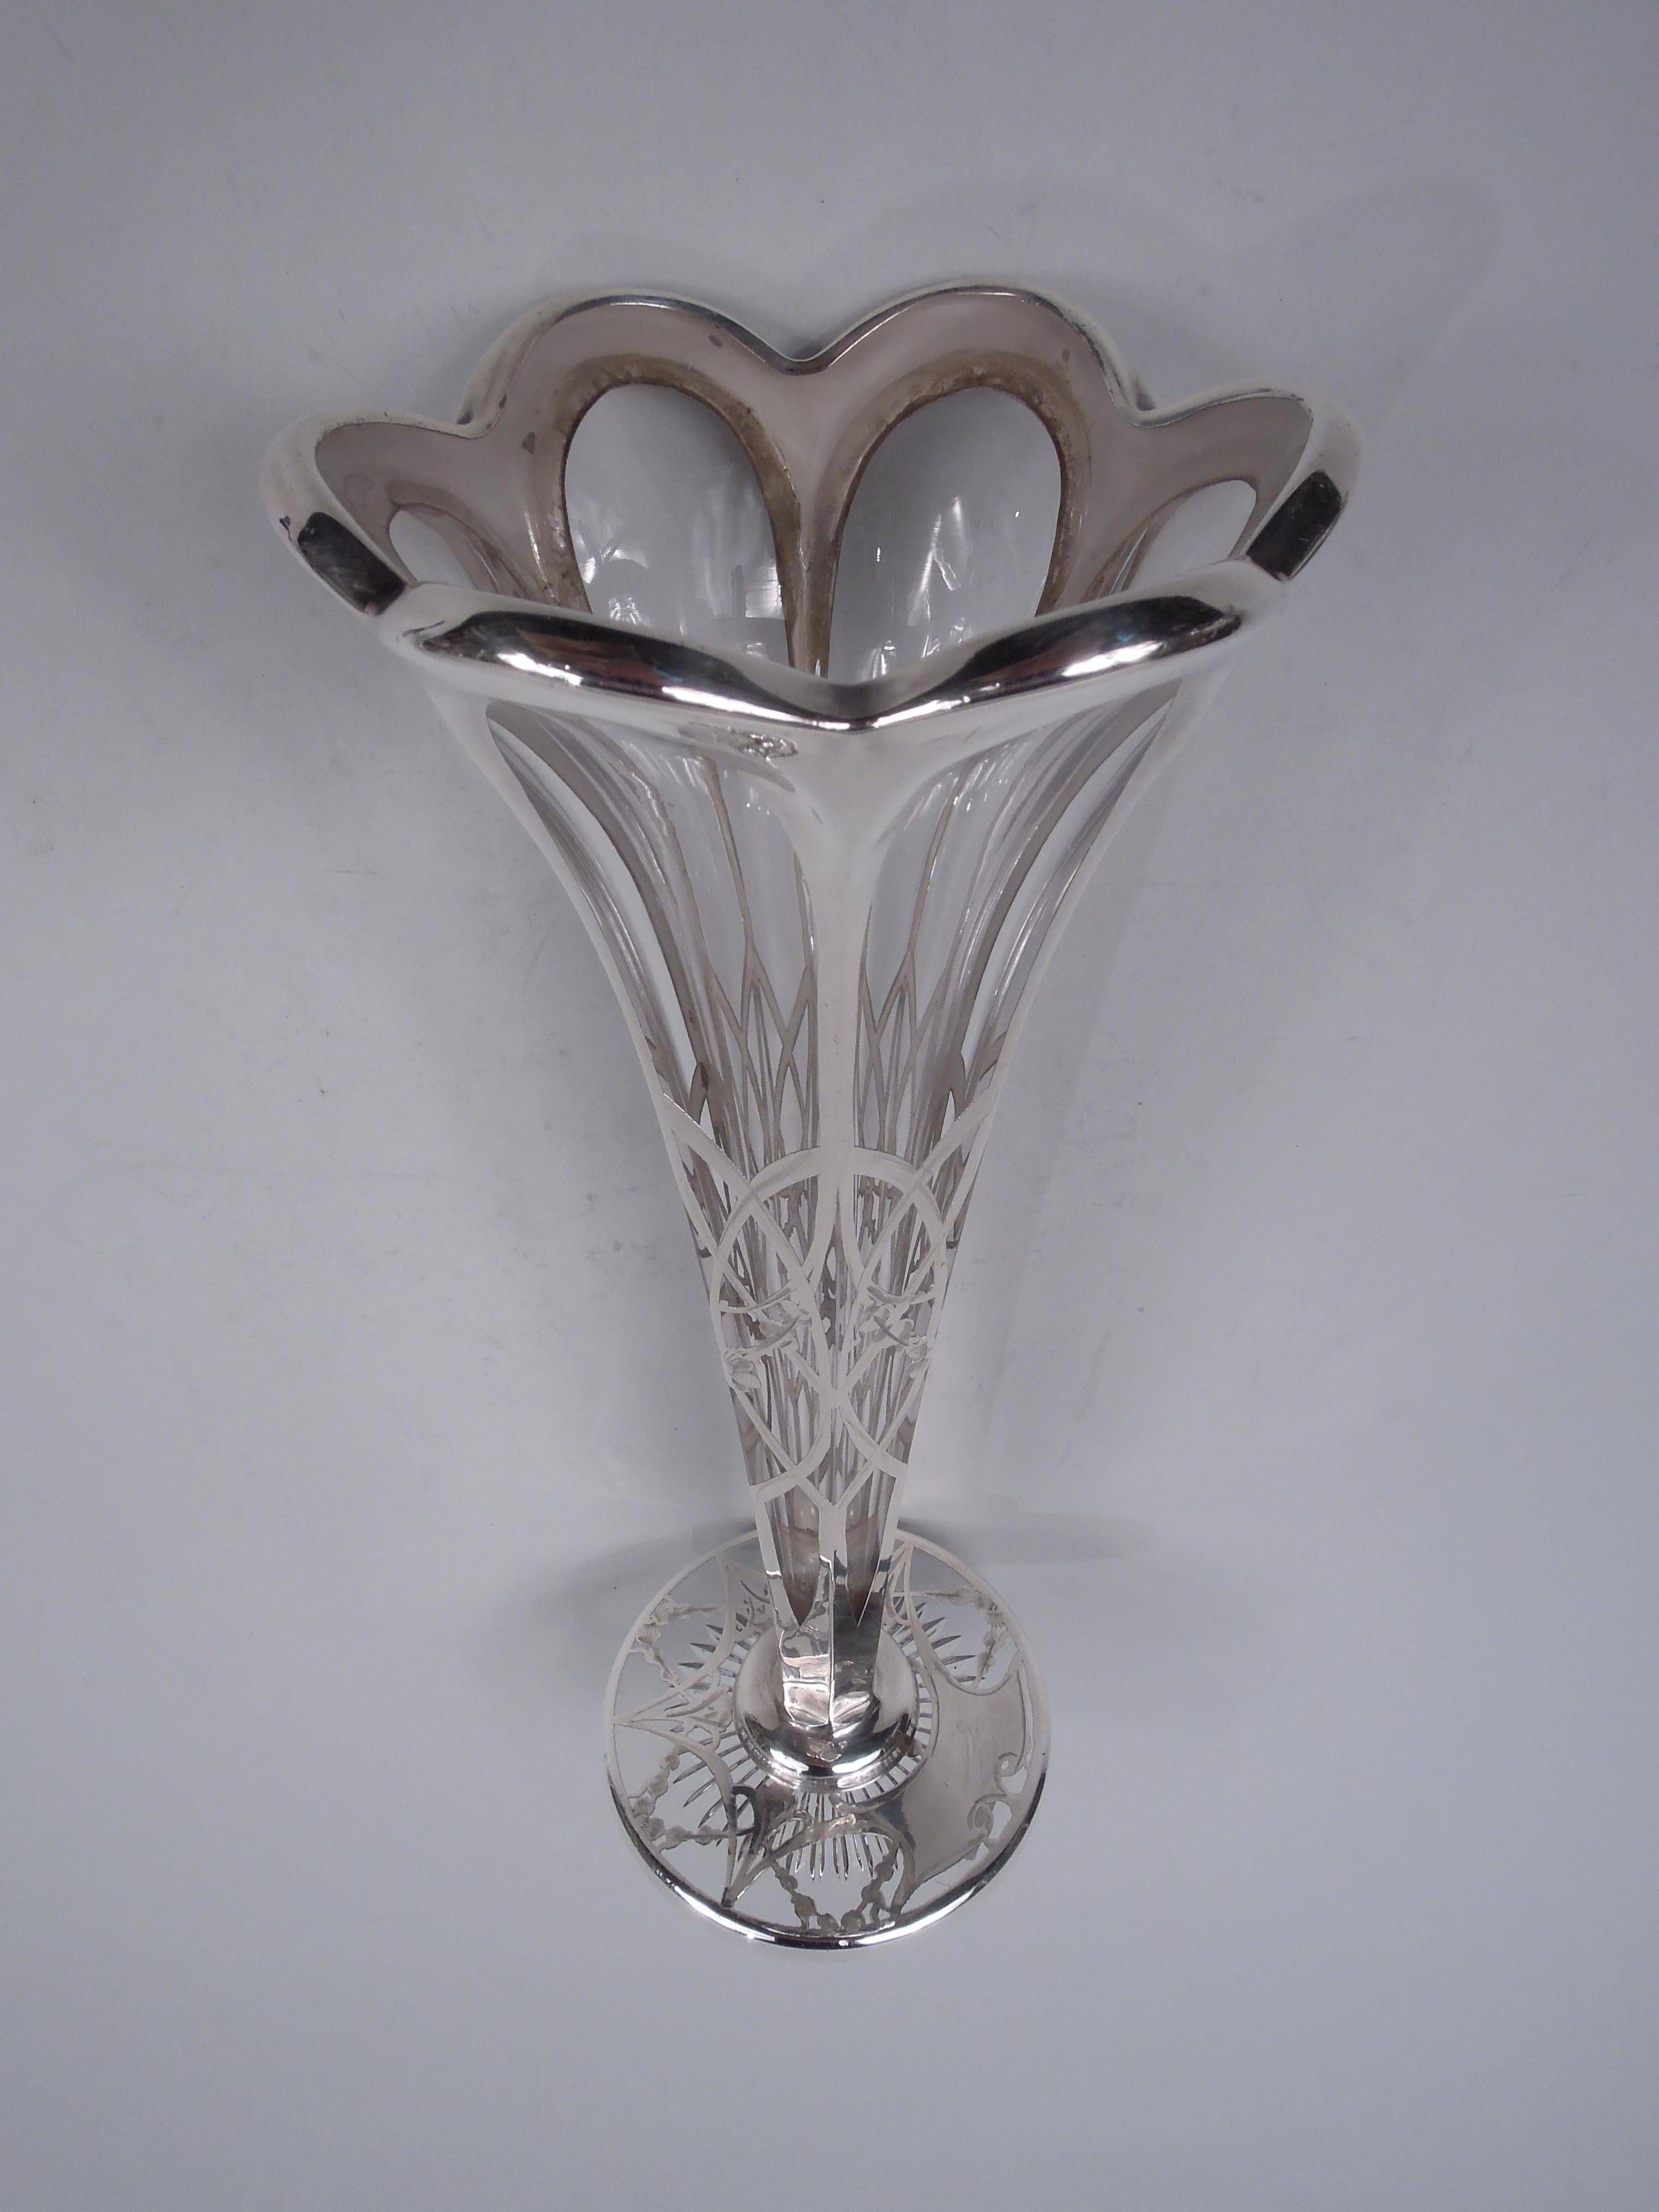 Edwardian Classical glass vase with engraved silver overlay. Made by La Pierre Mfg. Co. in Newark, ca 1910. Faceted cone with scalloped rim; round flat foot with star cut to underside. Overlay in form of garlands threaded through interlaced arches